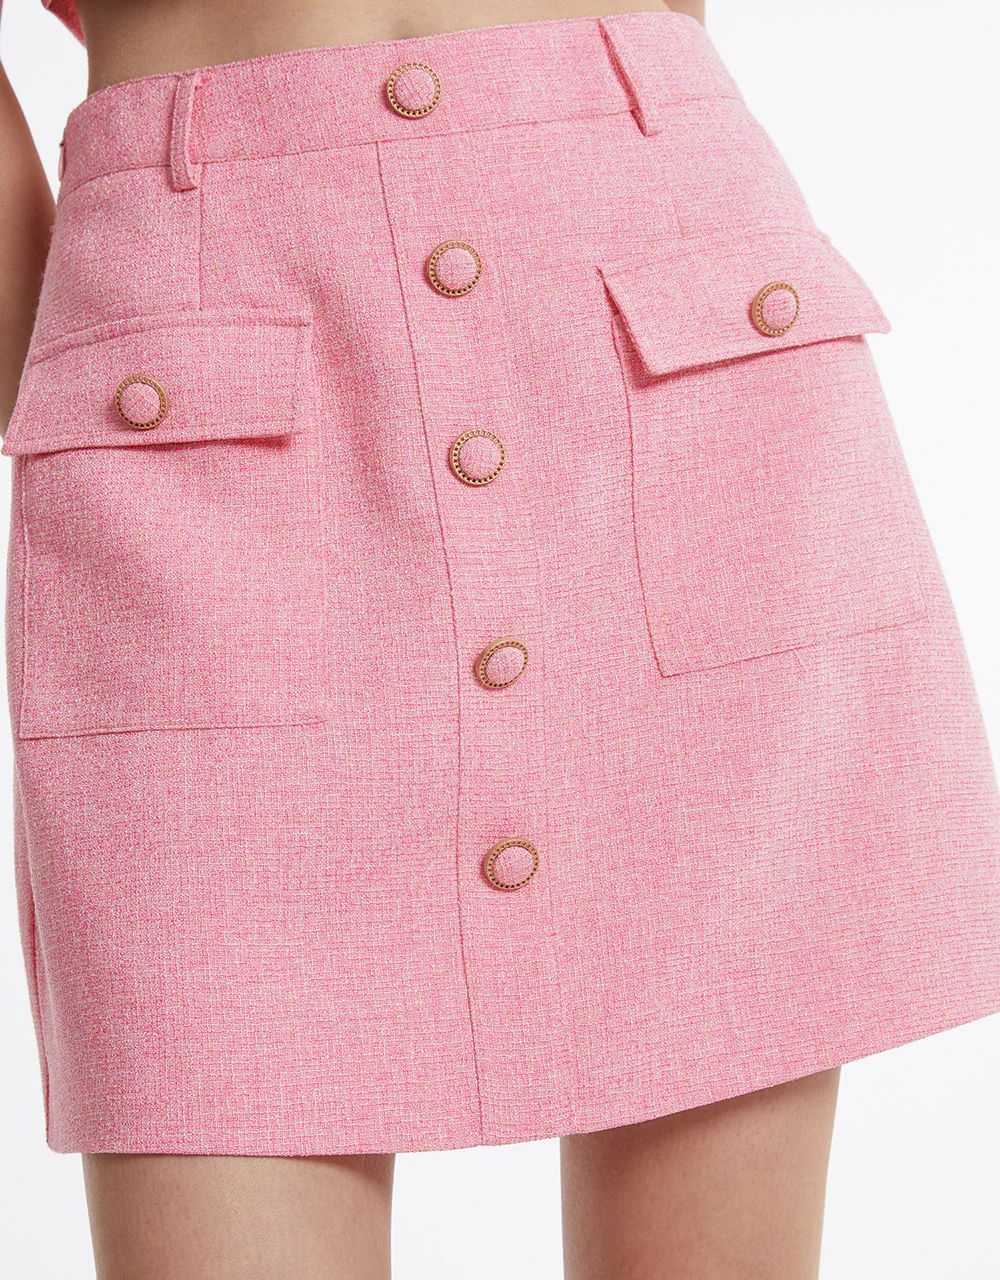 Textured Skirt With Buttons | Urban Revivo